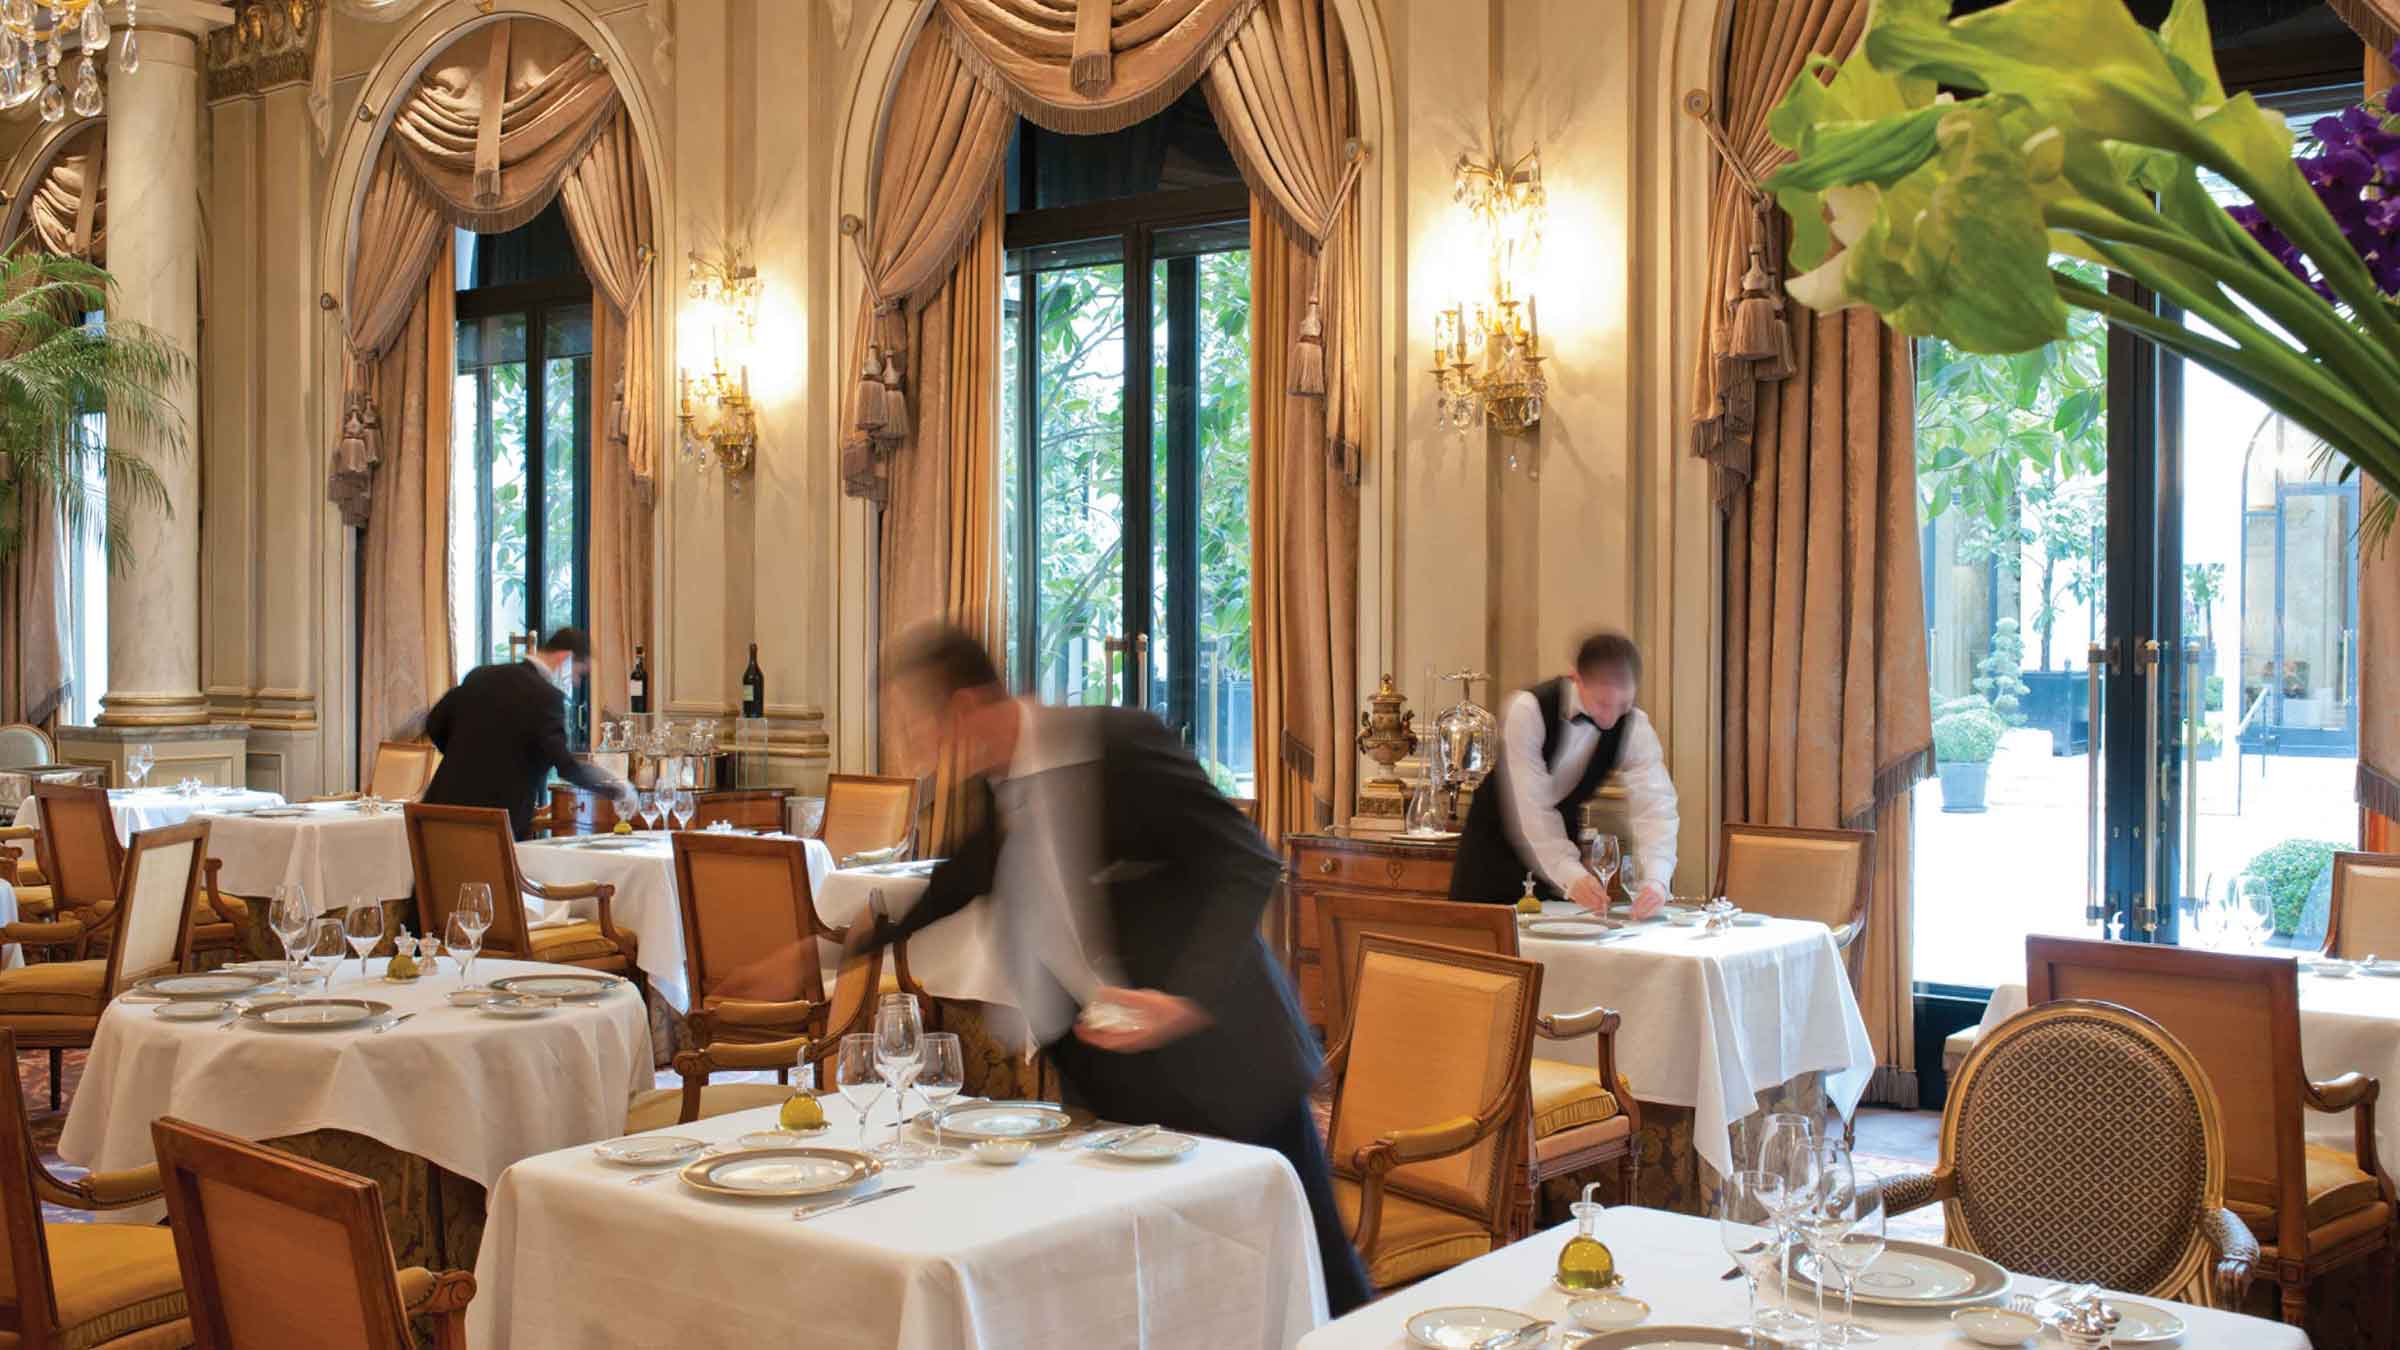 Waiters prepare the dining room at Le Cinq restaurant at Four Seasons Hotel George V—Paris, France